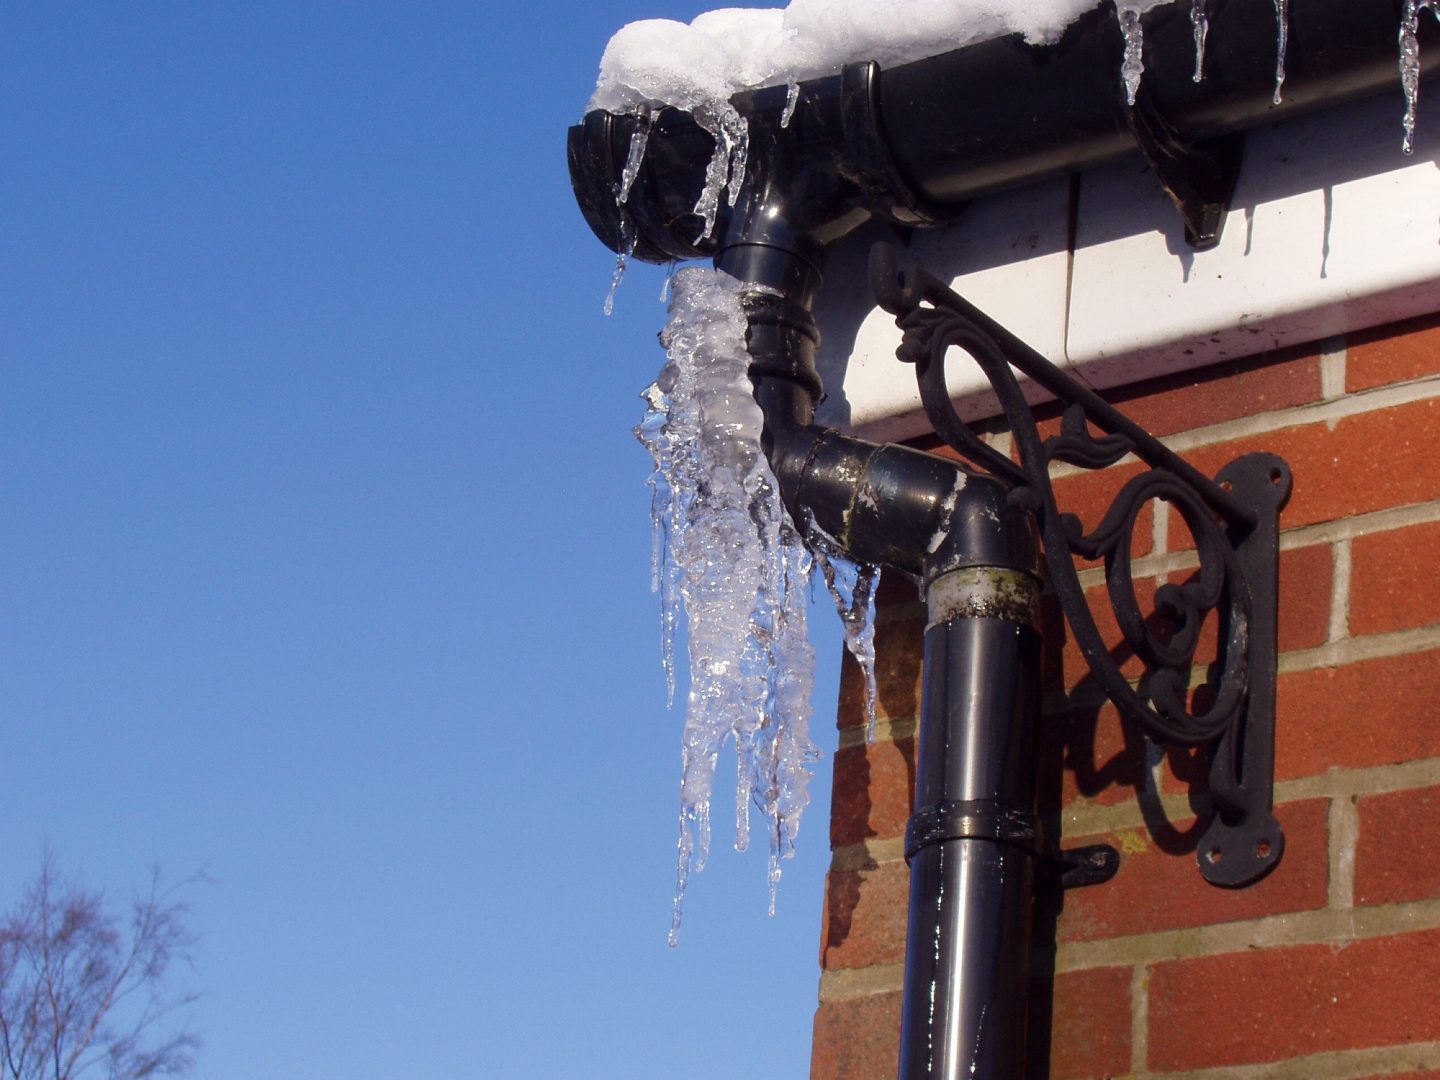 prevent frozen pipes through plumbing maintenance that helps you winterize your plumbing system this winter.